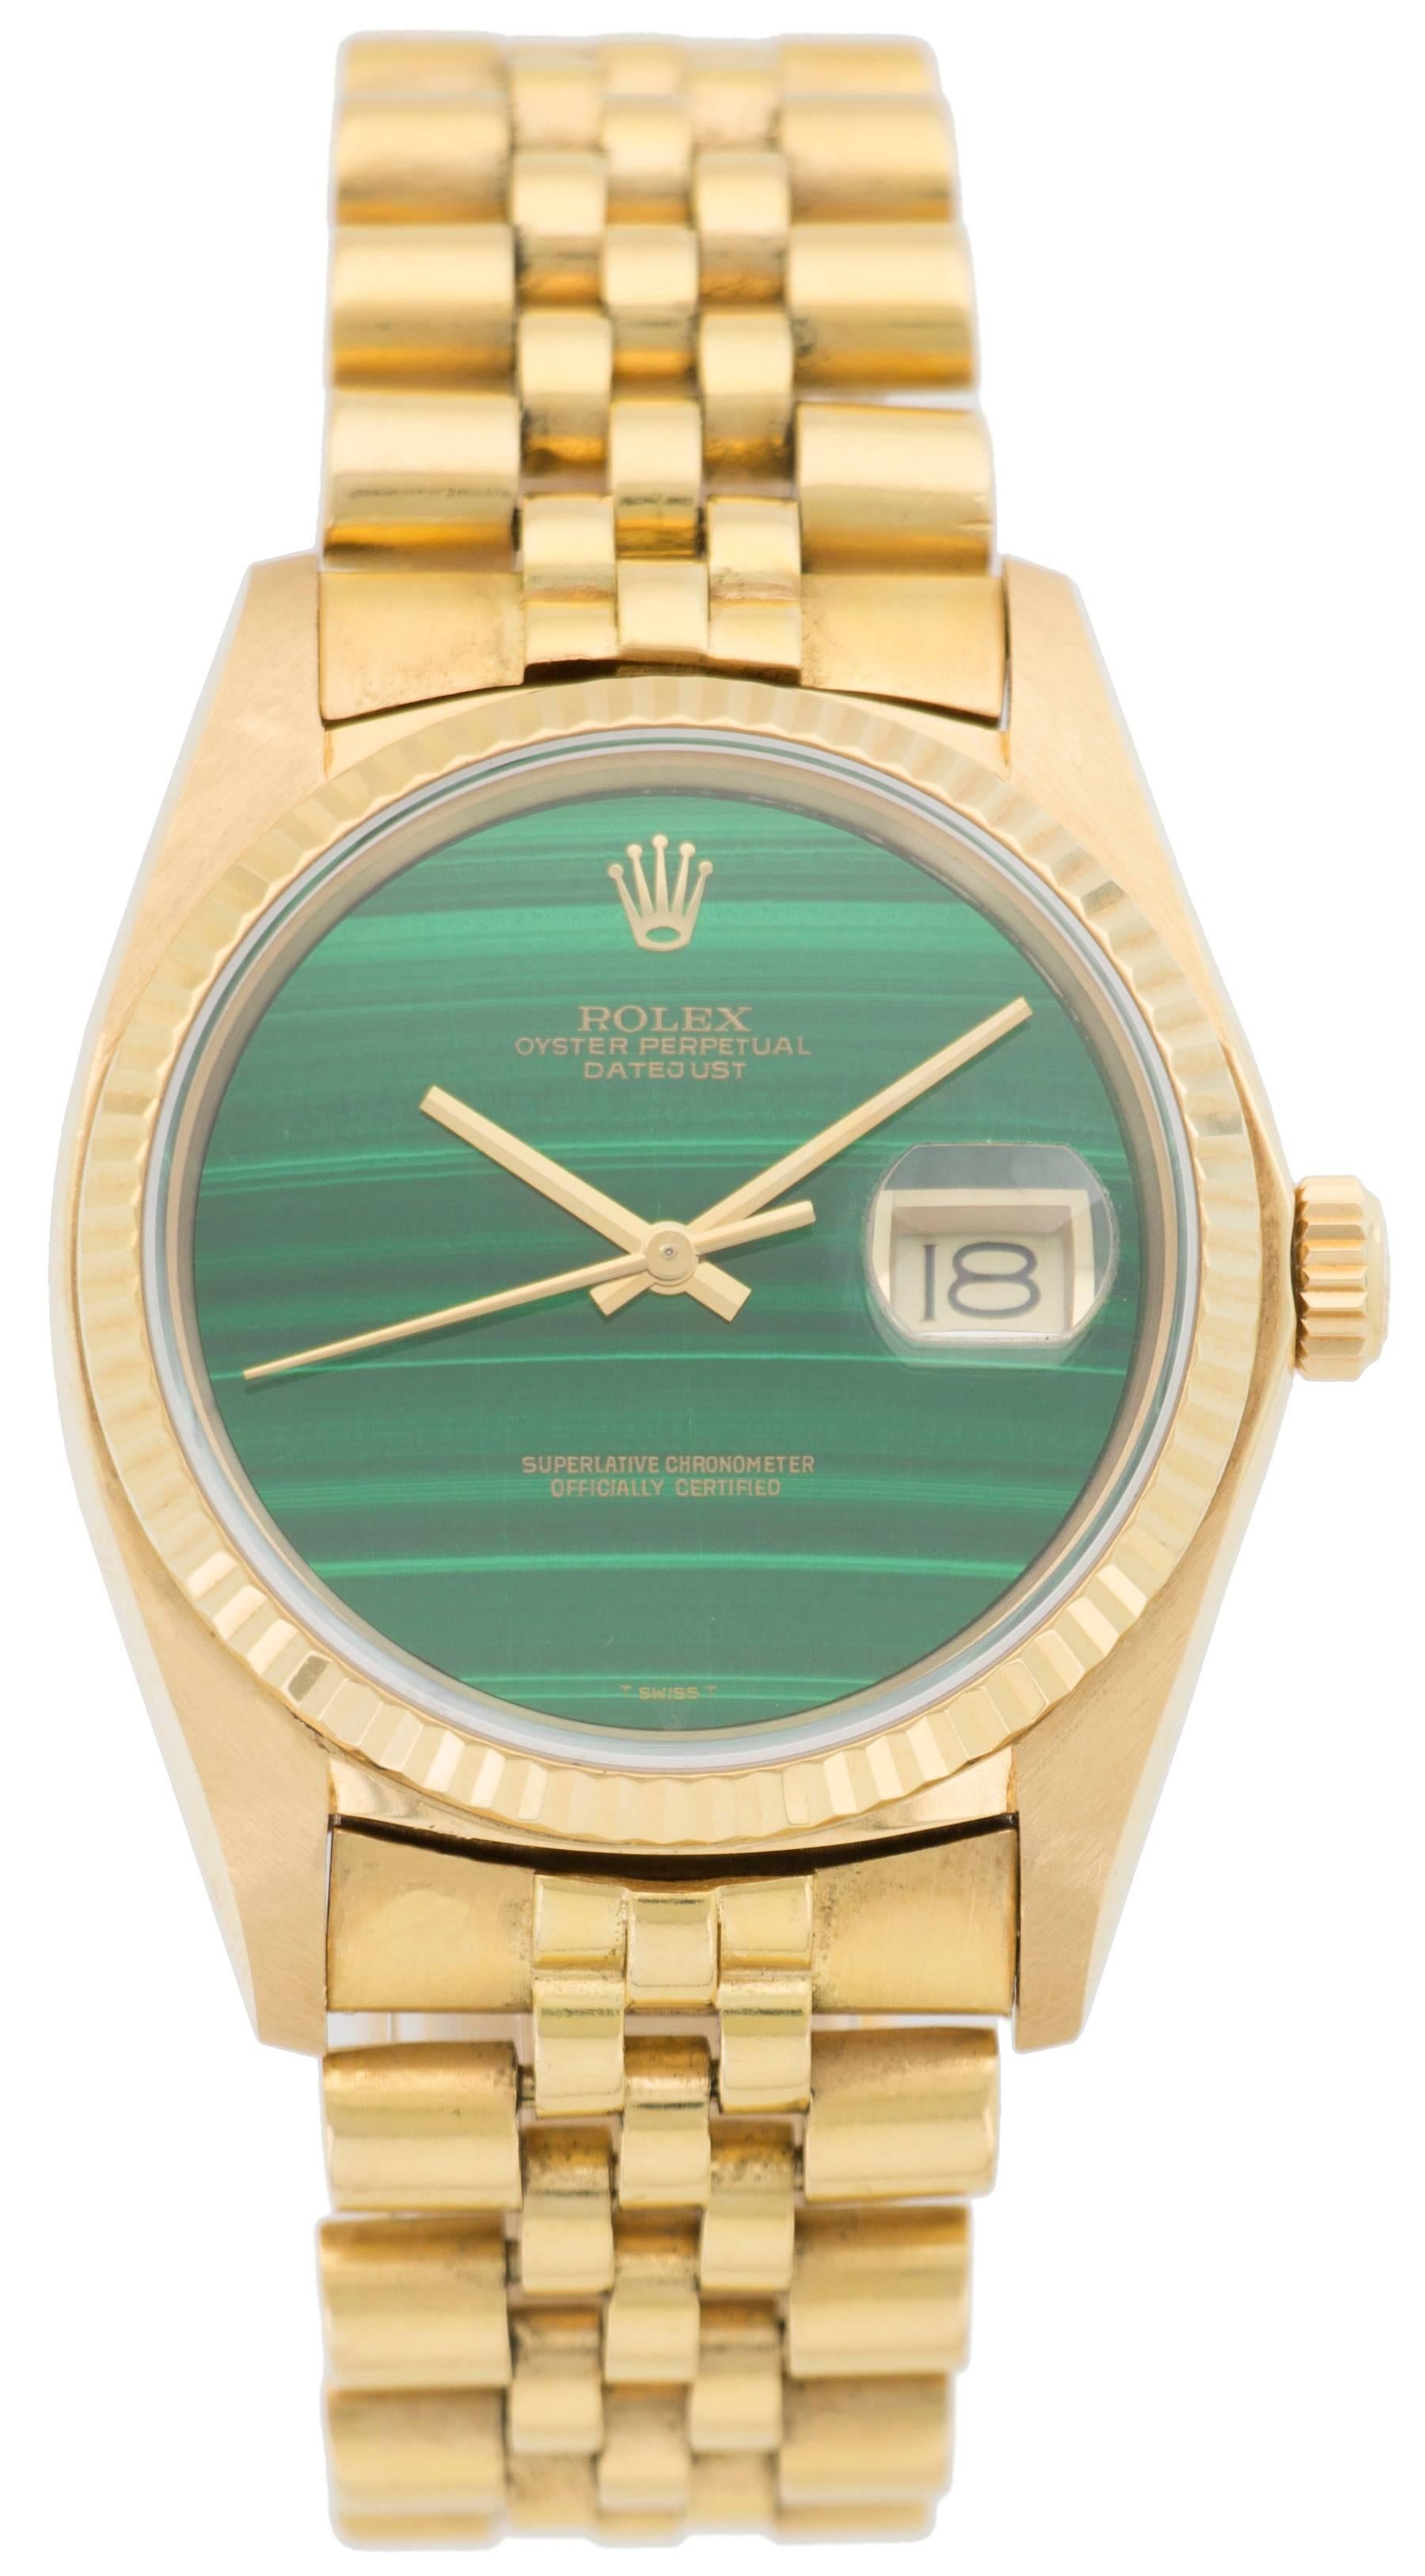 This Rolex Datejust, ref. 16018 features a rare and stunning malachite stone dial. Over the years, Rolex used a number of different stones to produce dials. The process of producing these stone dials was quite difficult, which meant lower production